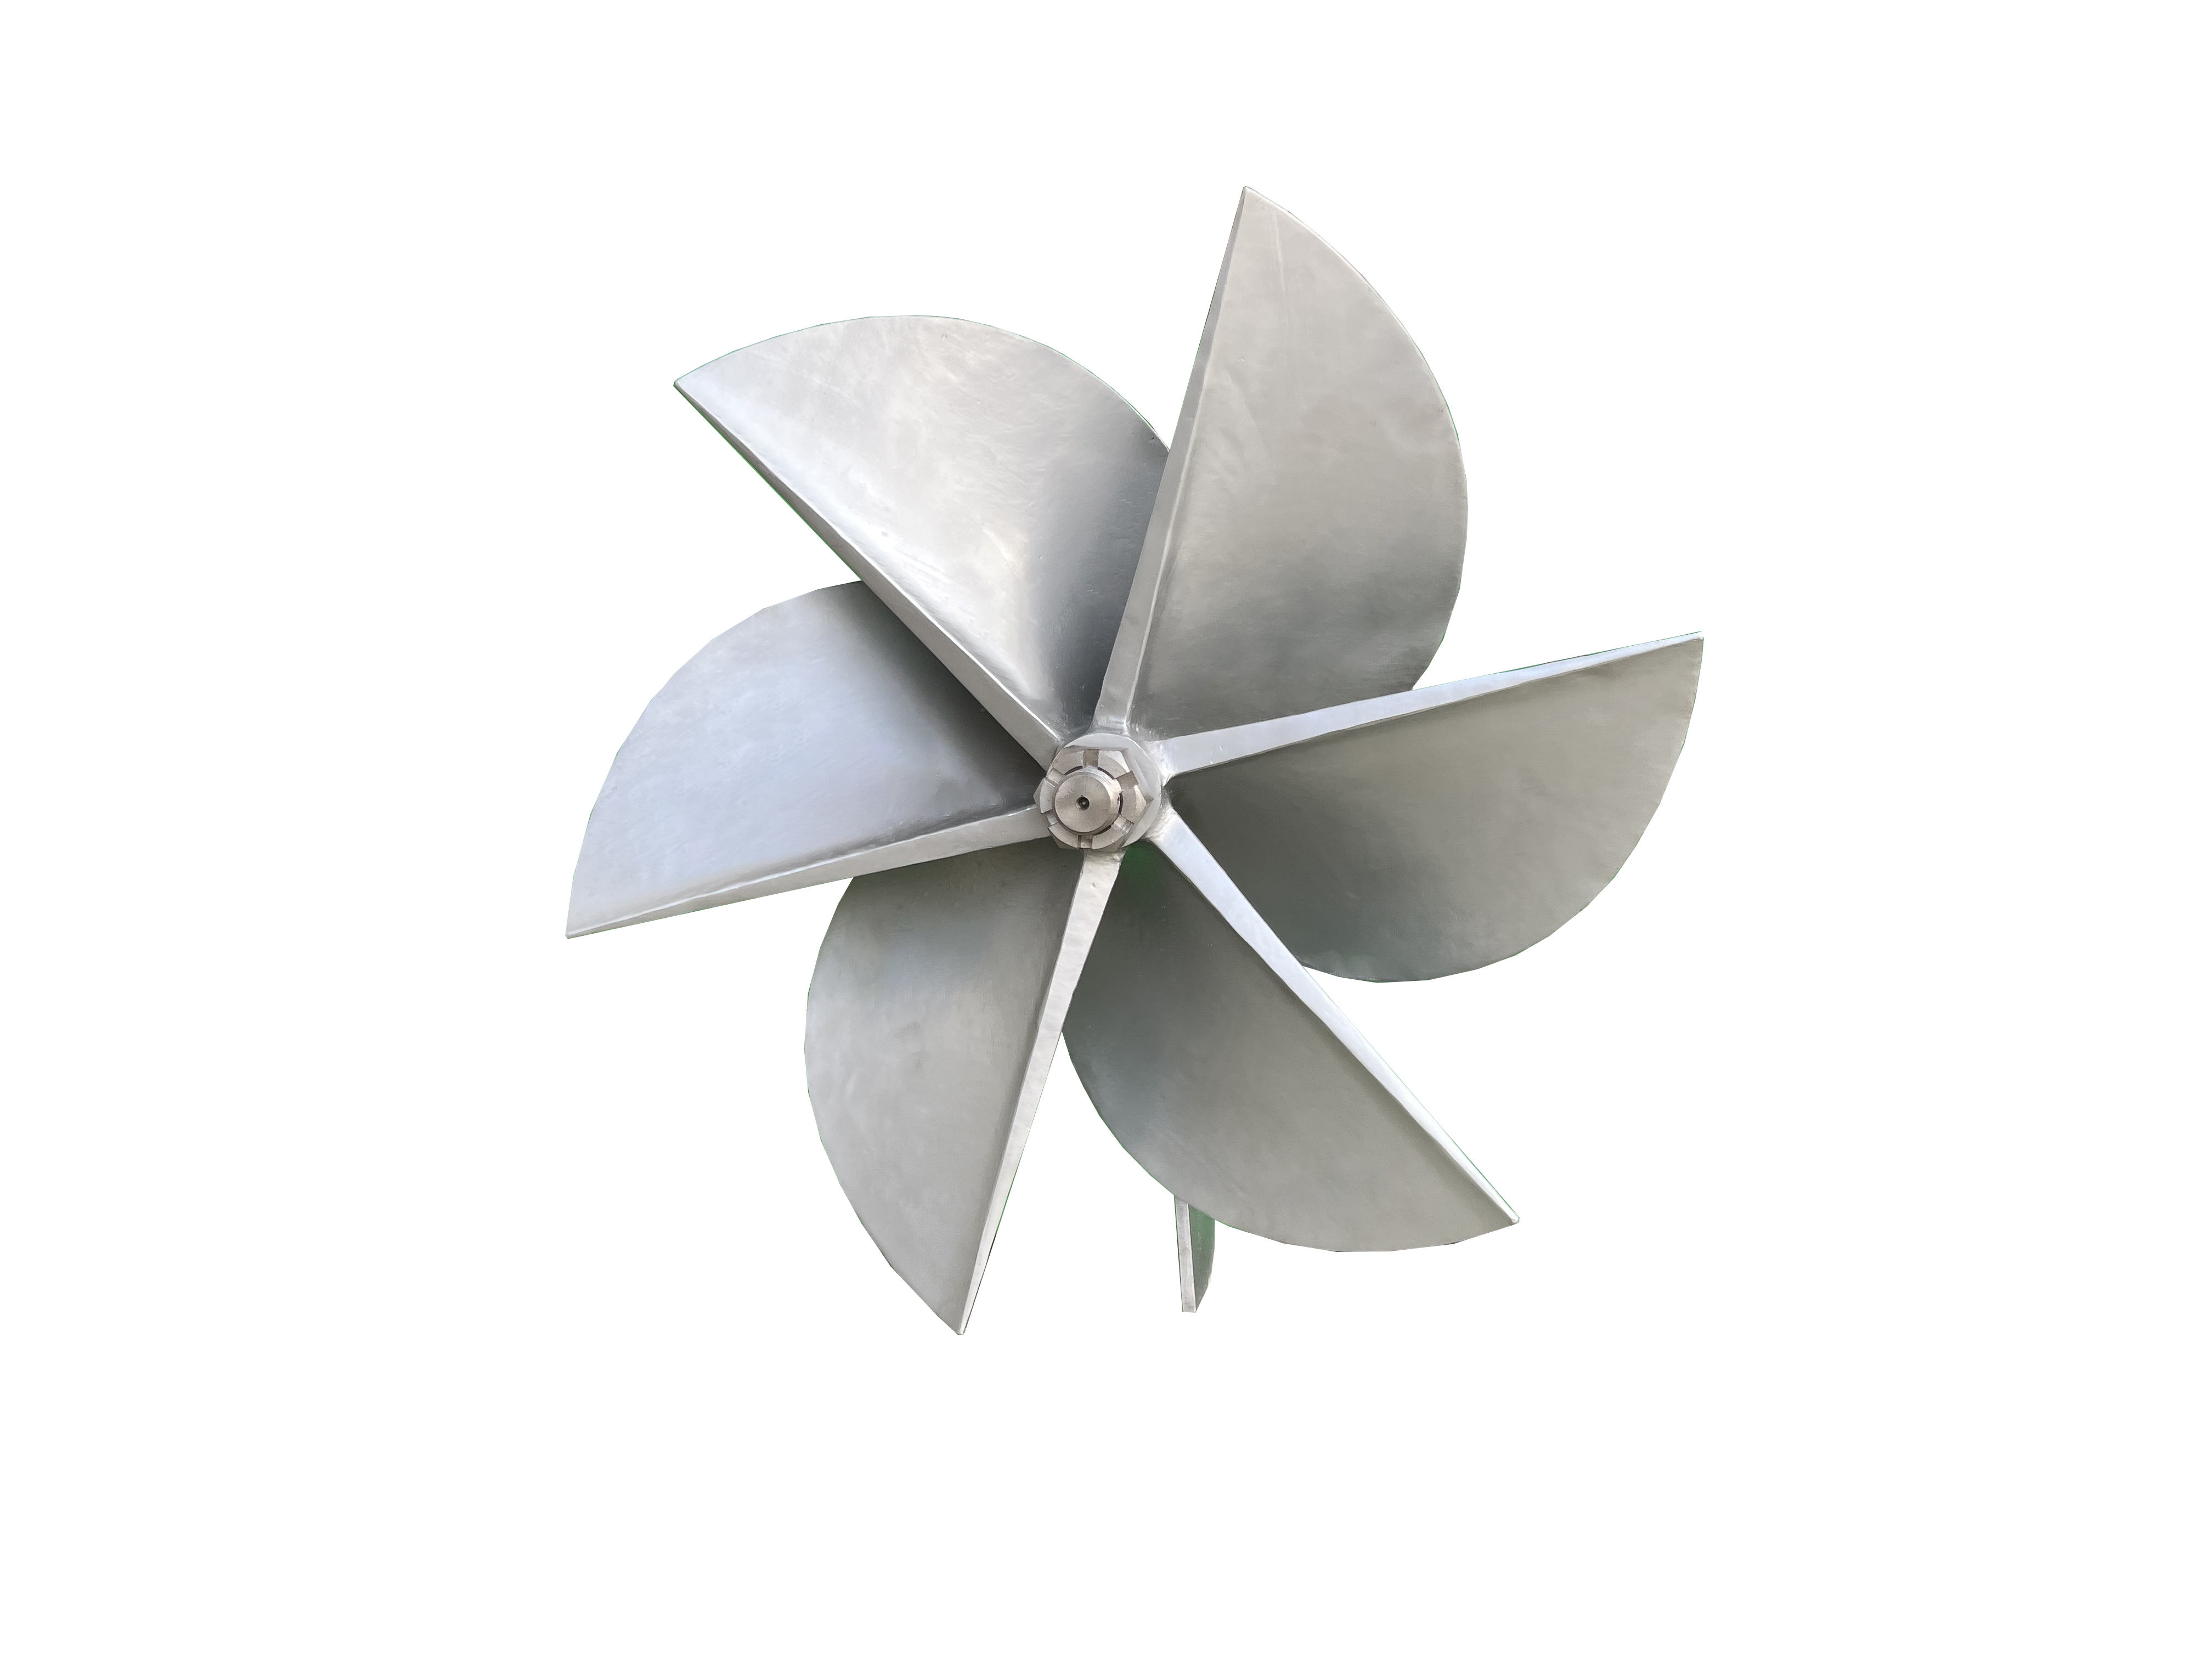 BH450 130Horsepower Stainless Steel Marine Propeller Advanced Surface Drive High Speed Surface Drive